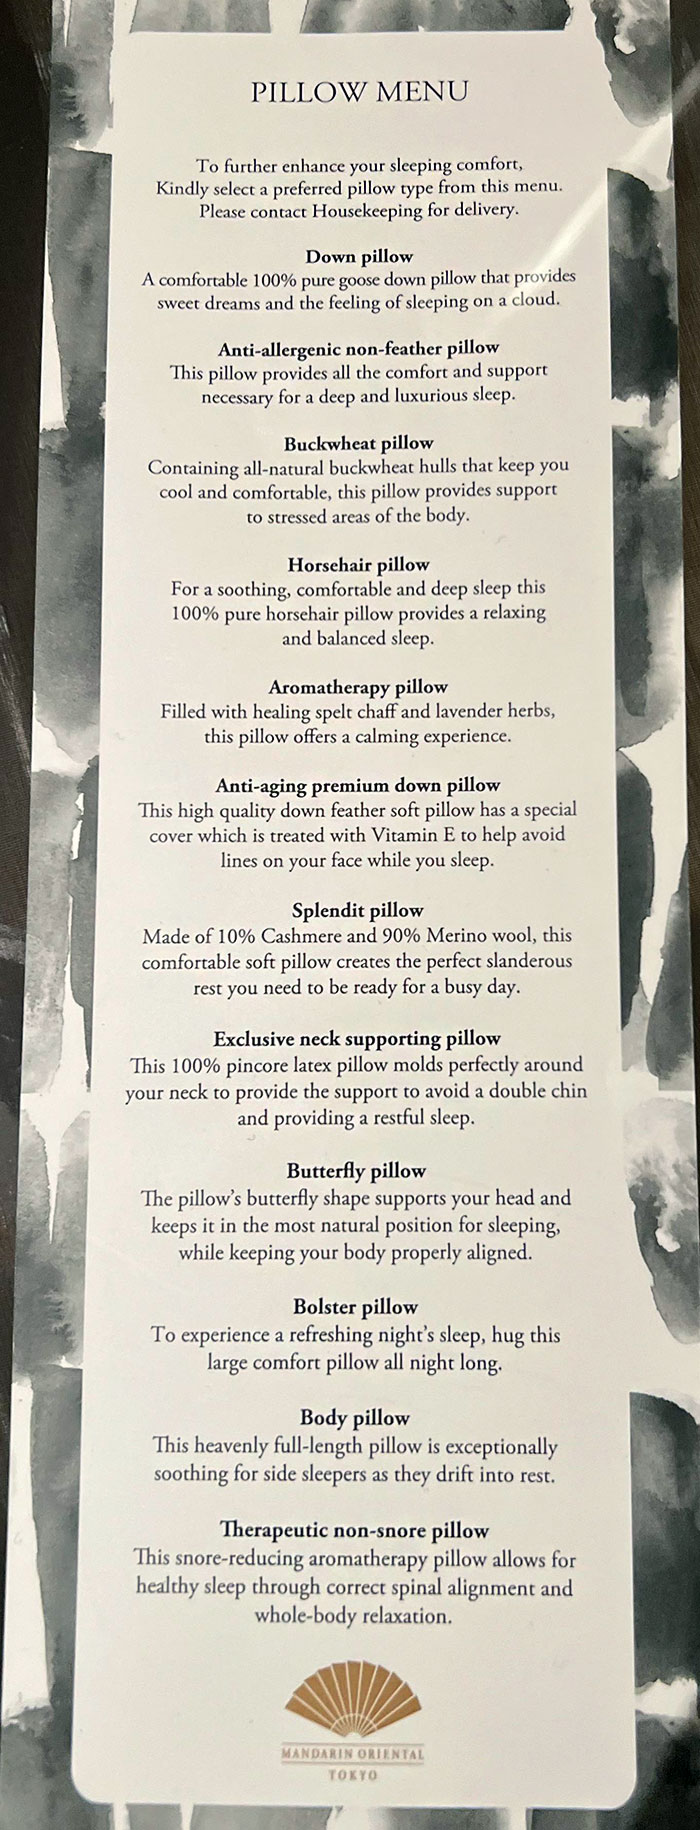 I Found A Pillow Menu In My Hotel Room